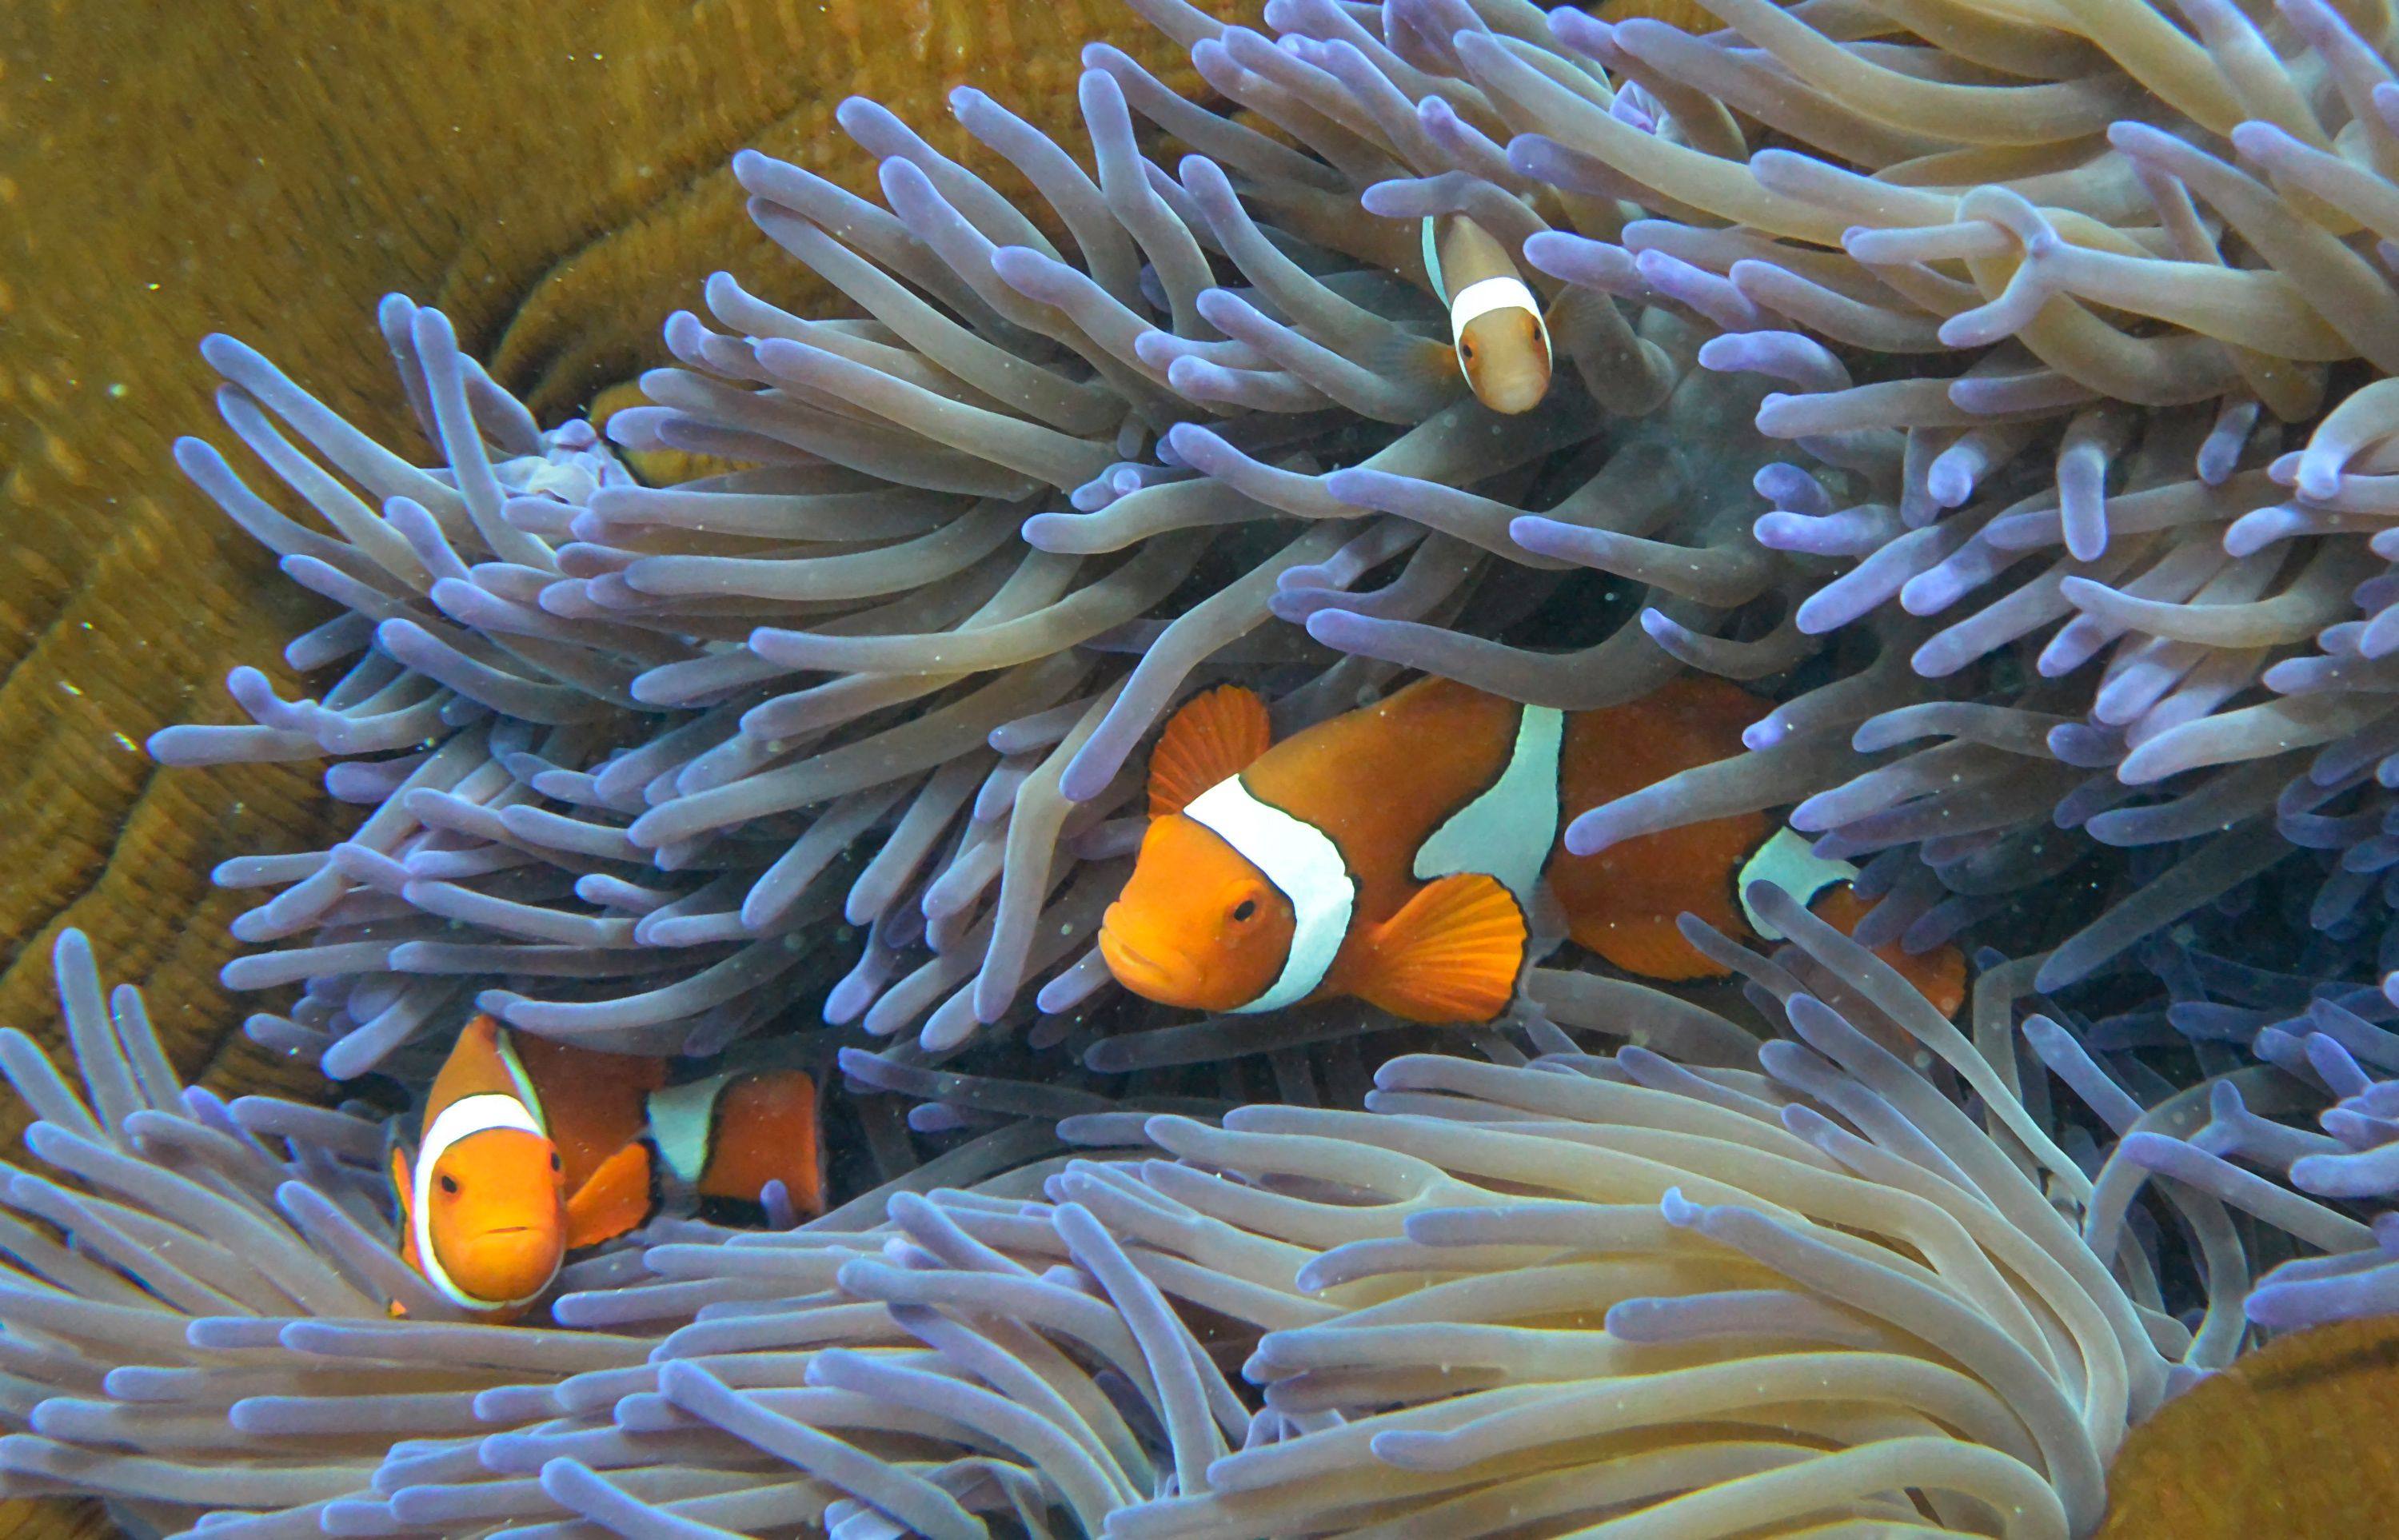 Fish on Australia’s Great Barrier Reef on September 22, 2014. Investments in marine ecosystems are disproportionately low given their importance for climate and biodiversity. Photo: AFP